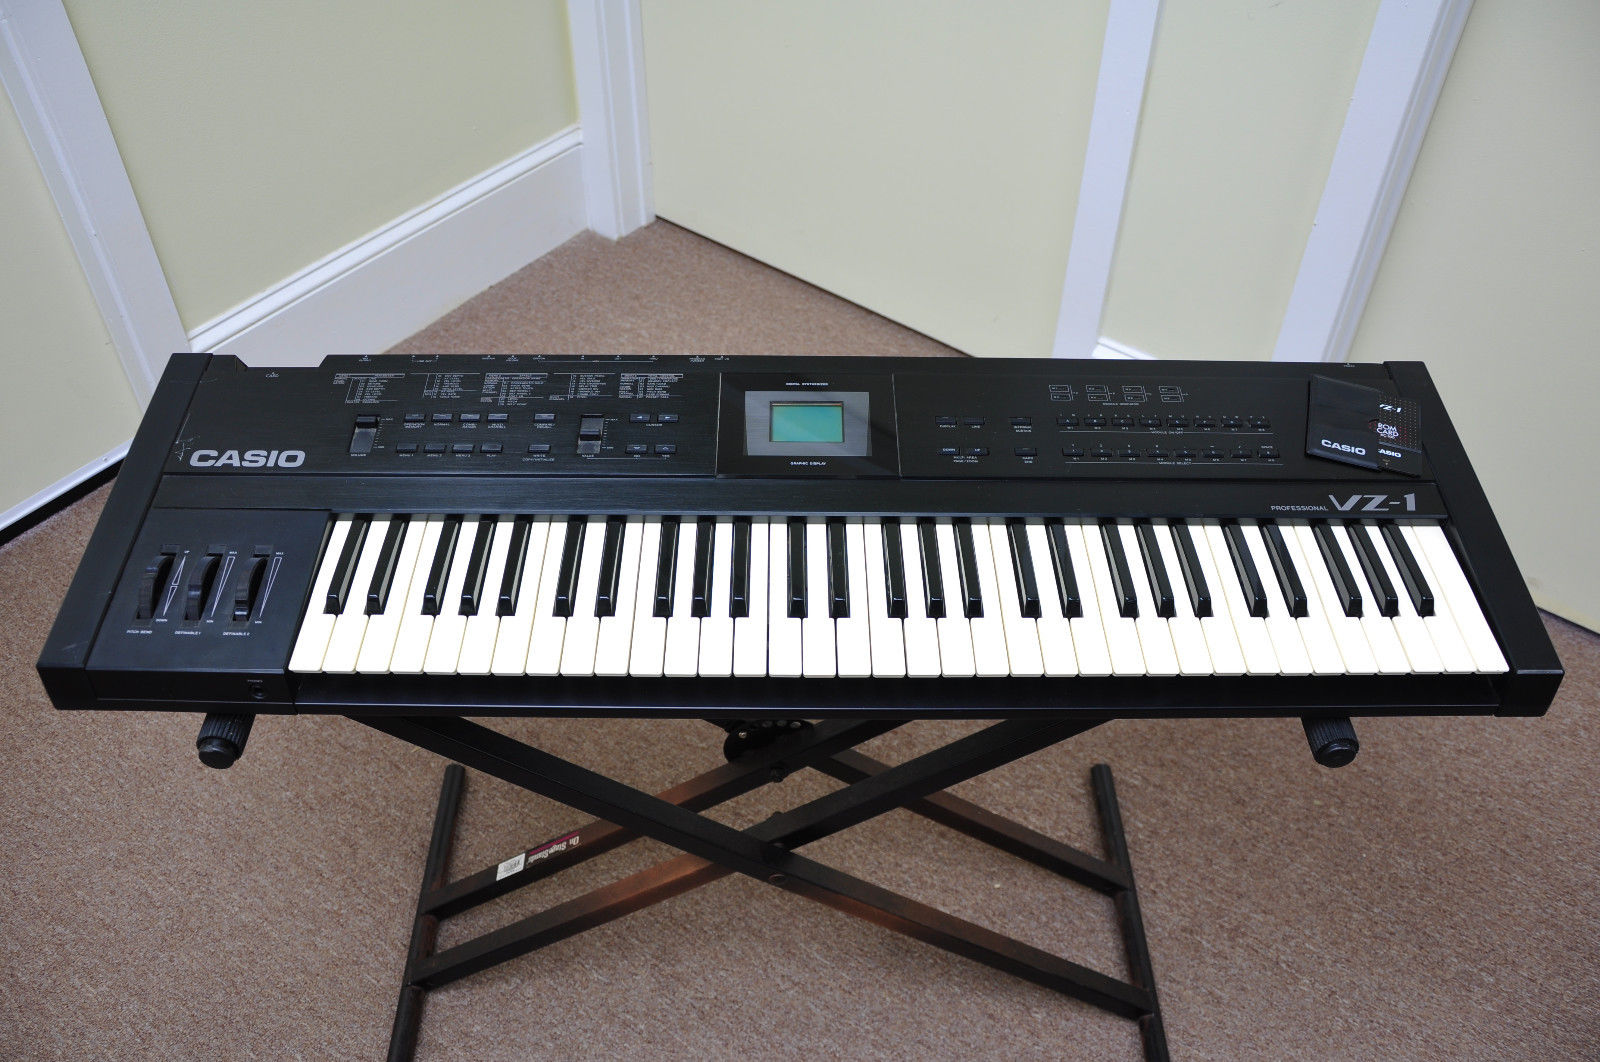 MATRIXSYNTH: 1980s Casio VZ-1 Digital Synthesizer with PCM